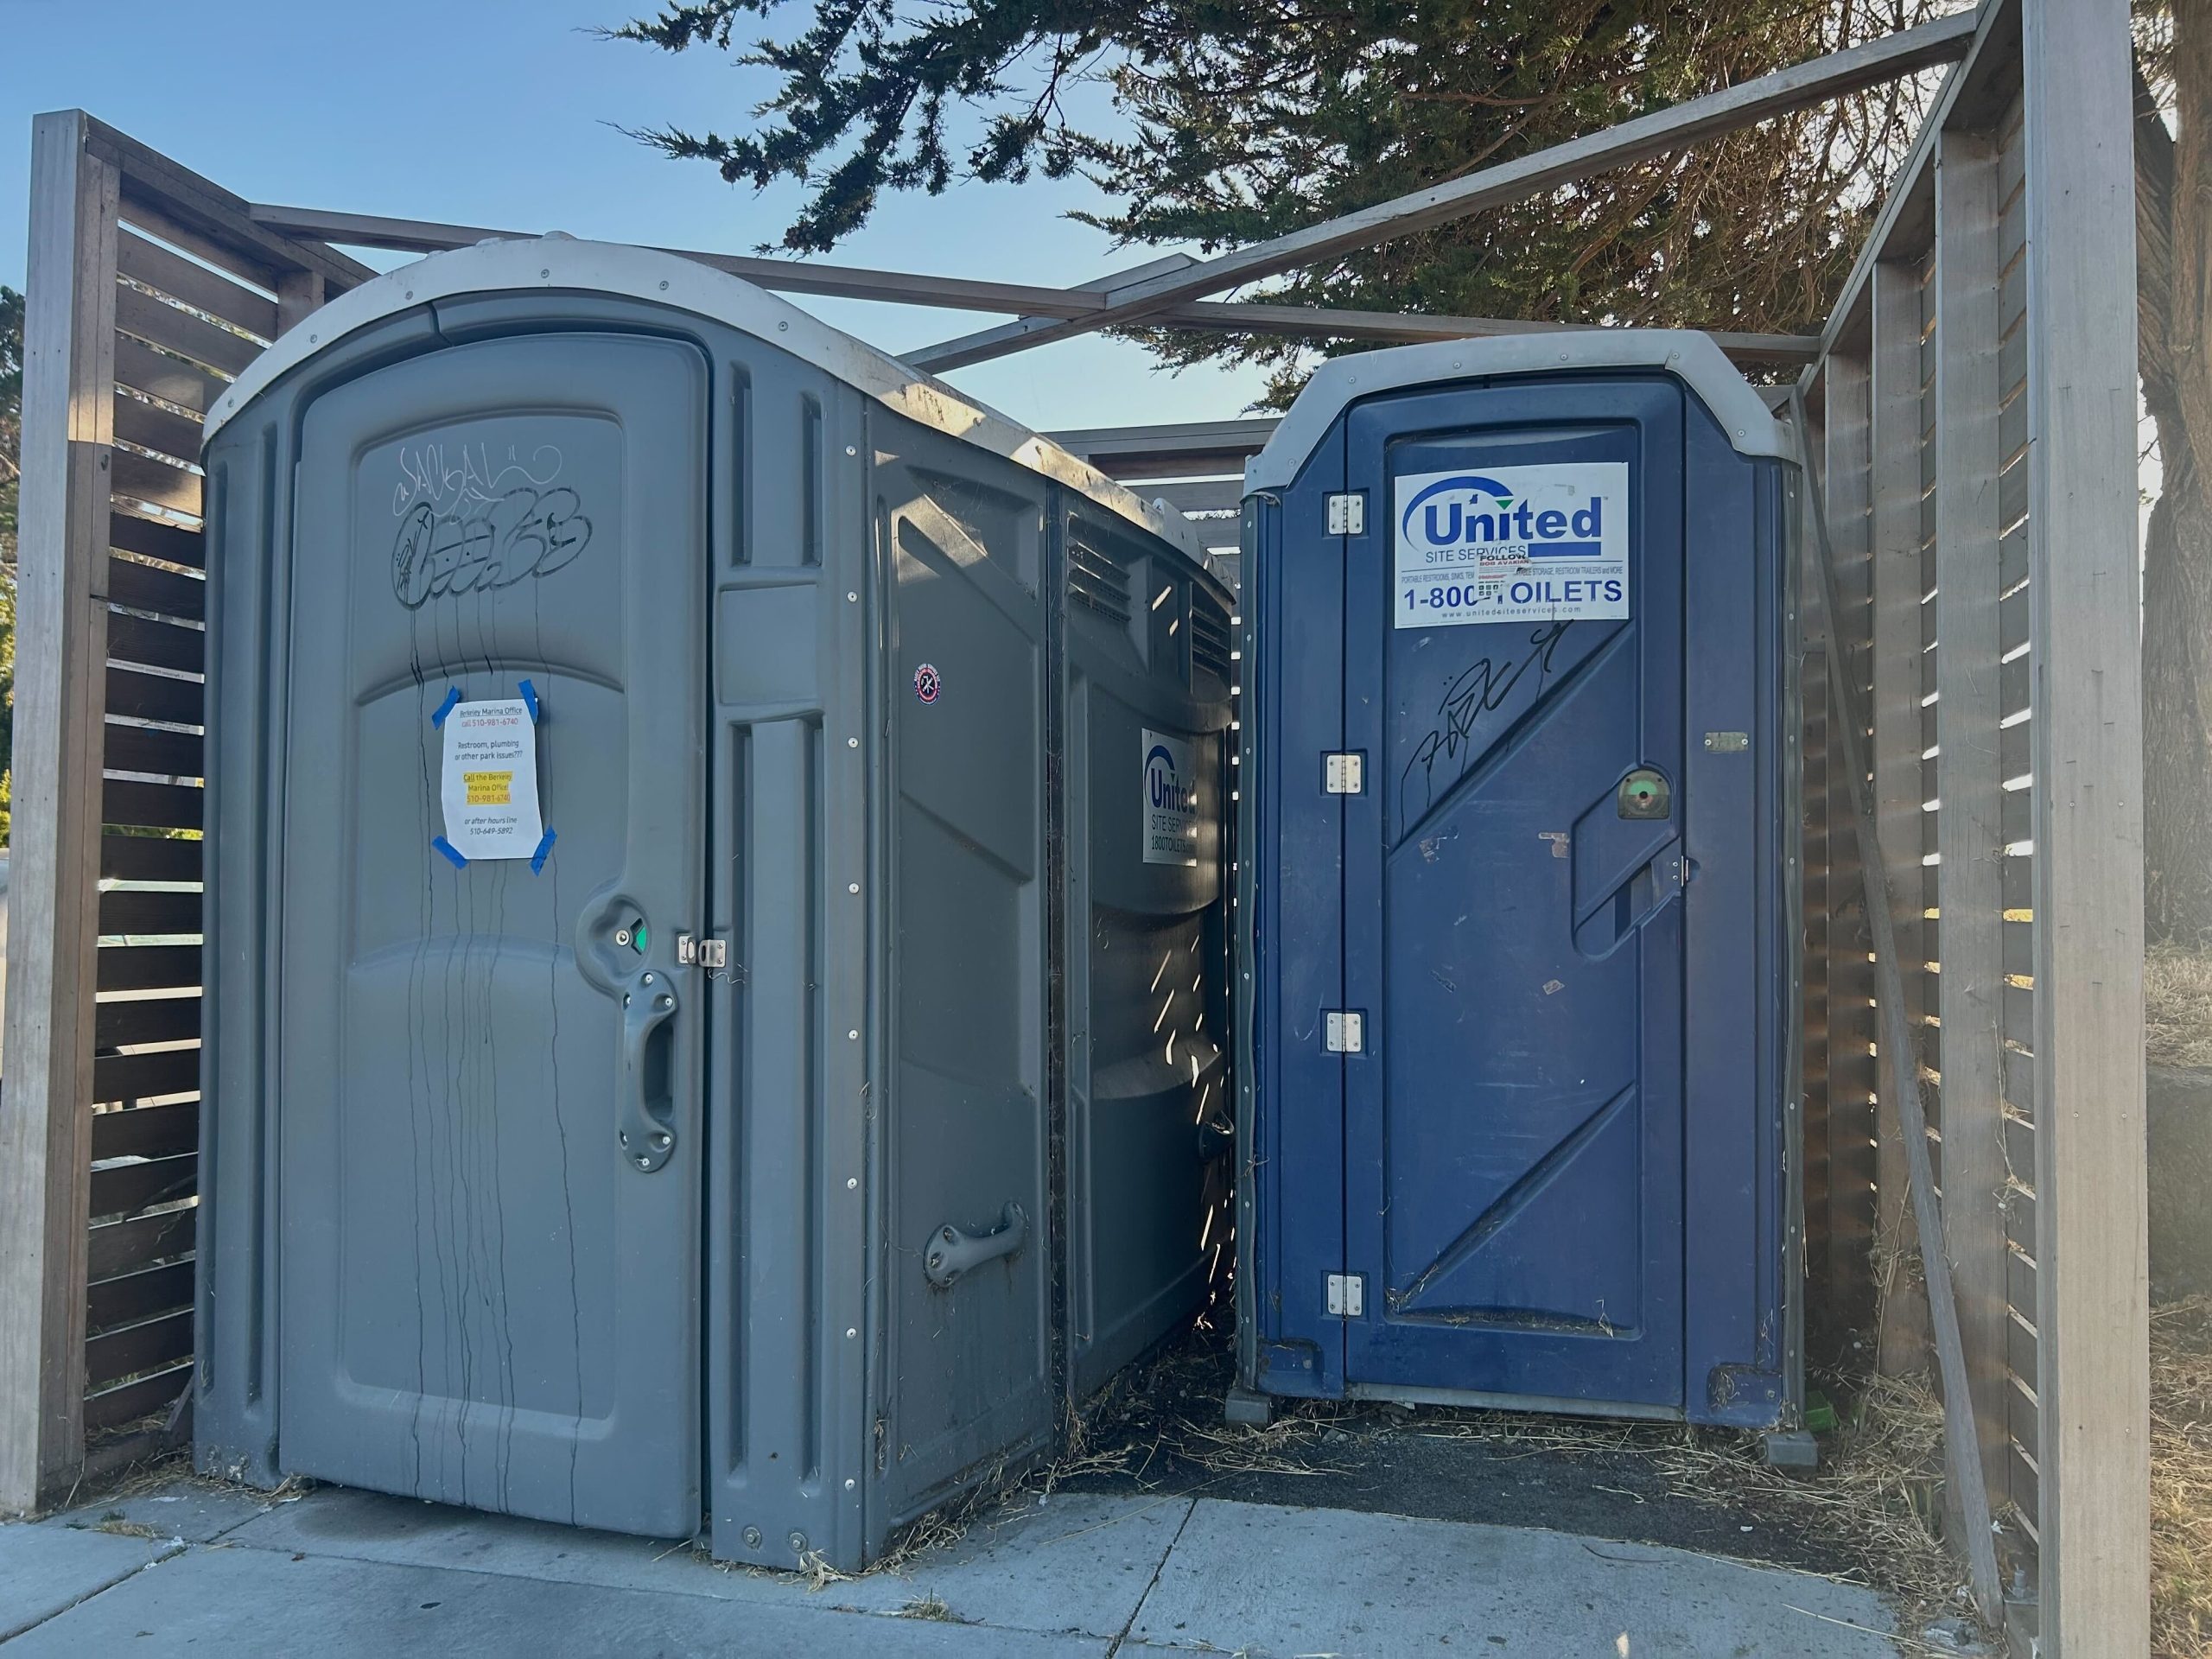 Porta-potties to be replaced by public restroom at Cesar Chavez Park